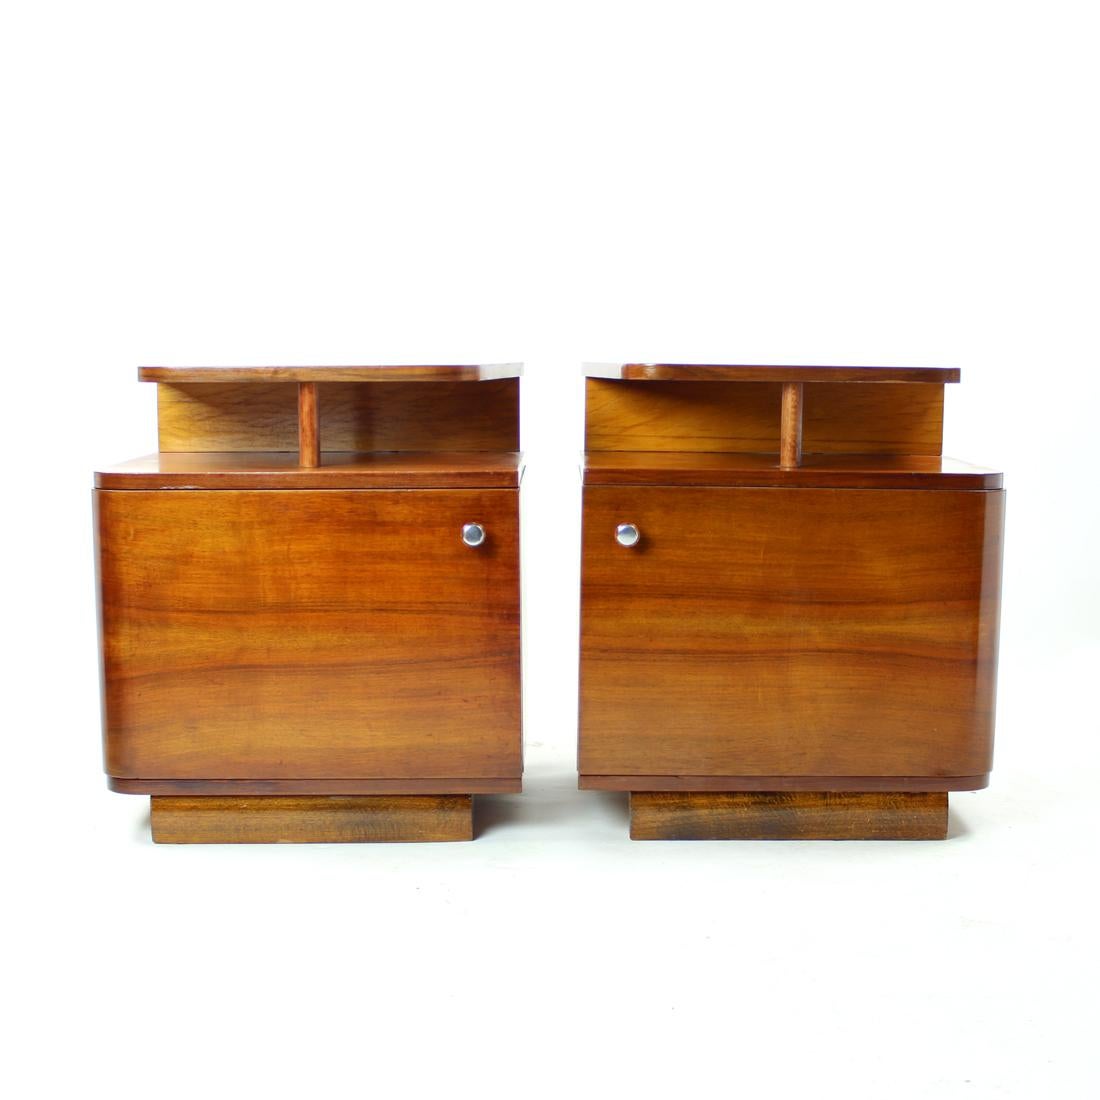 Beautiful and completely restored set of two bedside tables. Produced in the 1930s by UP Zavody. Stylish combination of the art deco/ functionalism style. Elegant design. Produced in oak and walnut combination of wood. There is a floating shelf on